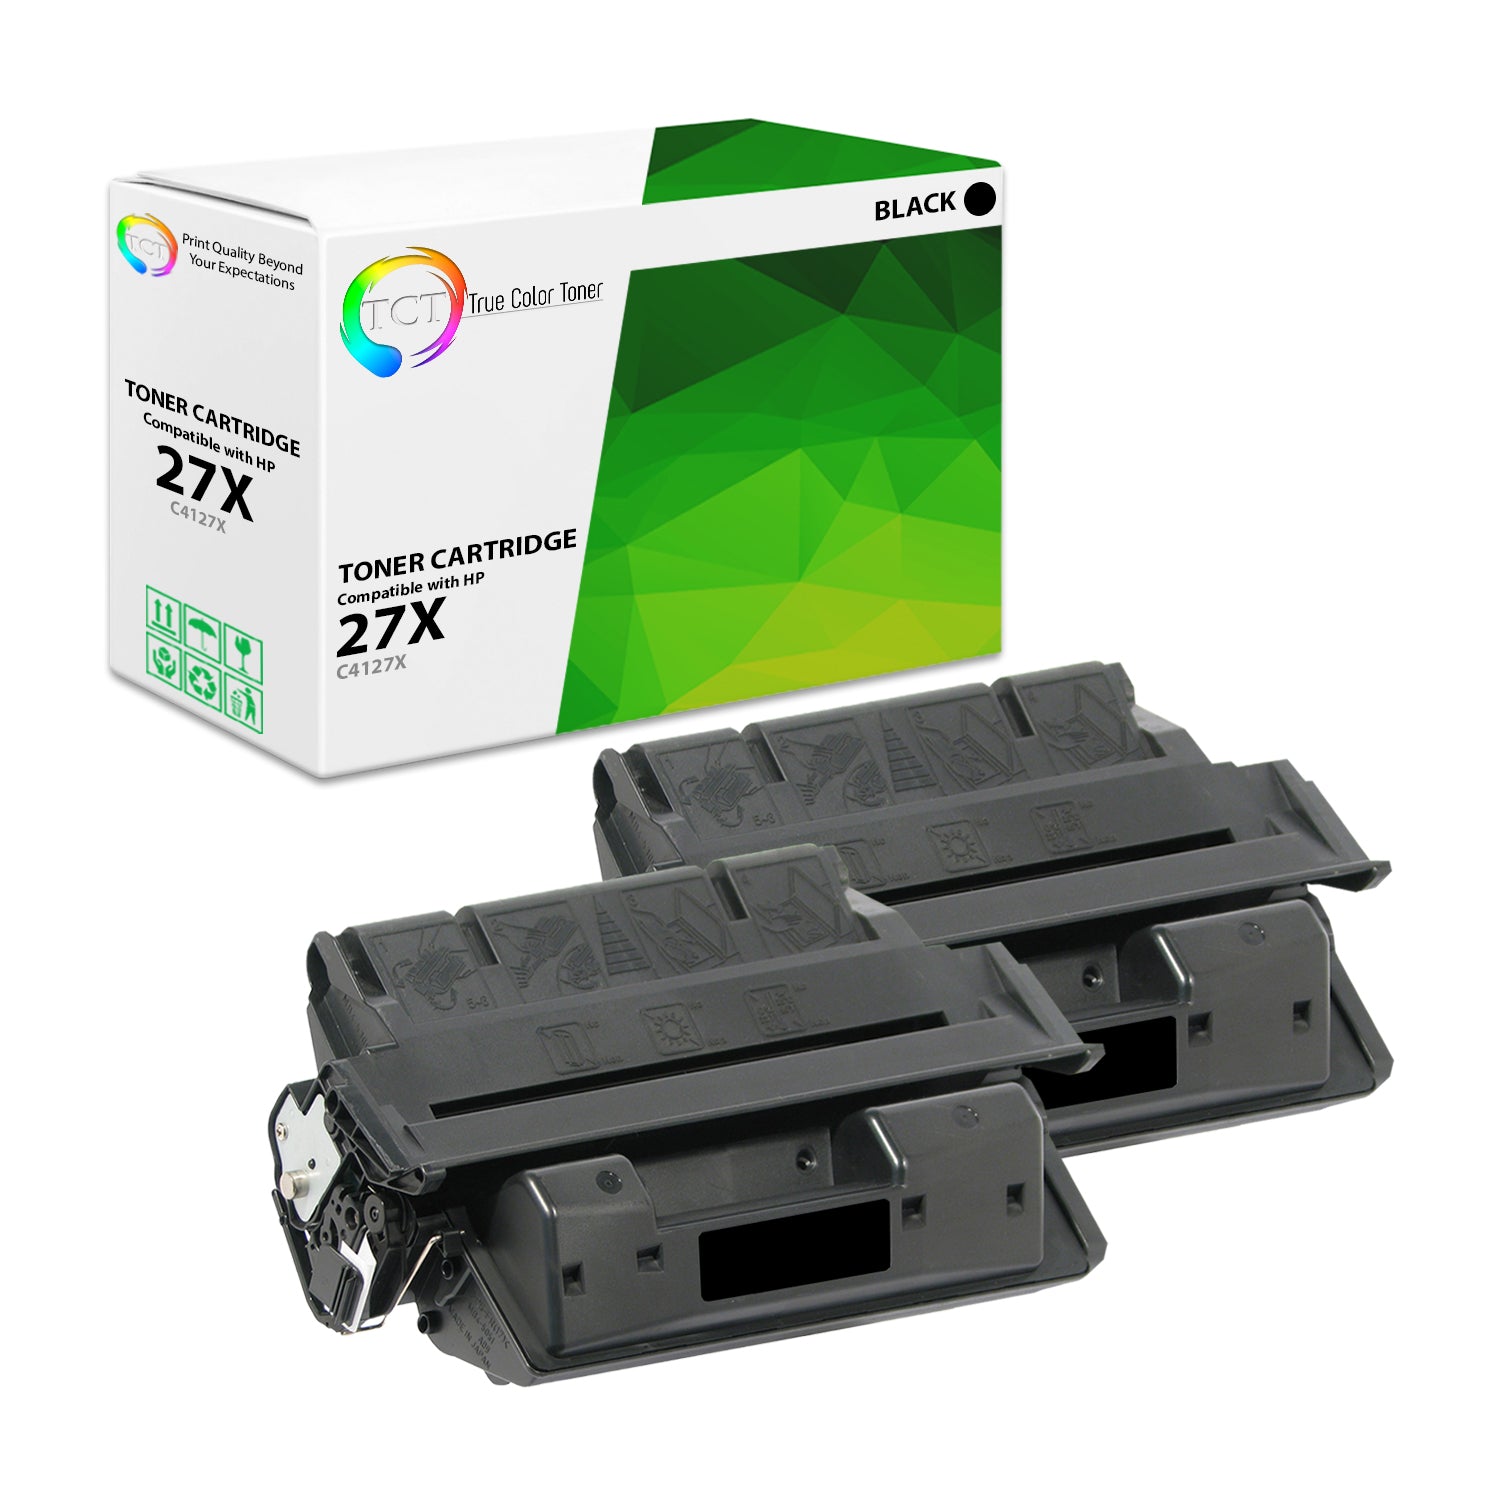 TCT Compatible High Yield Toner Cartridge Replacement for the HP 27X Series - 2 Pack Black